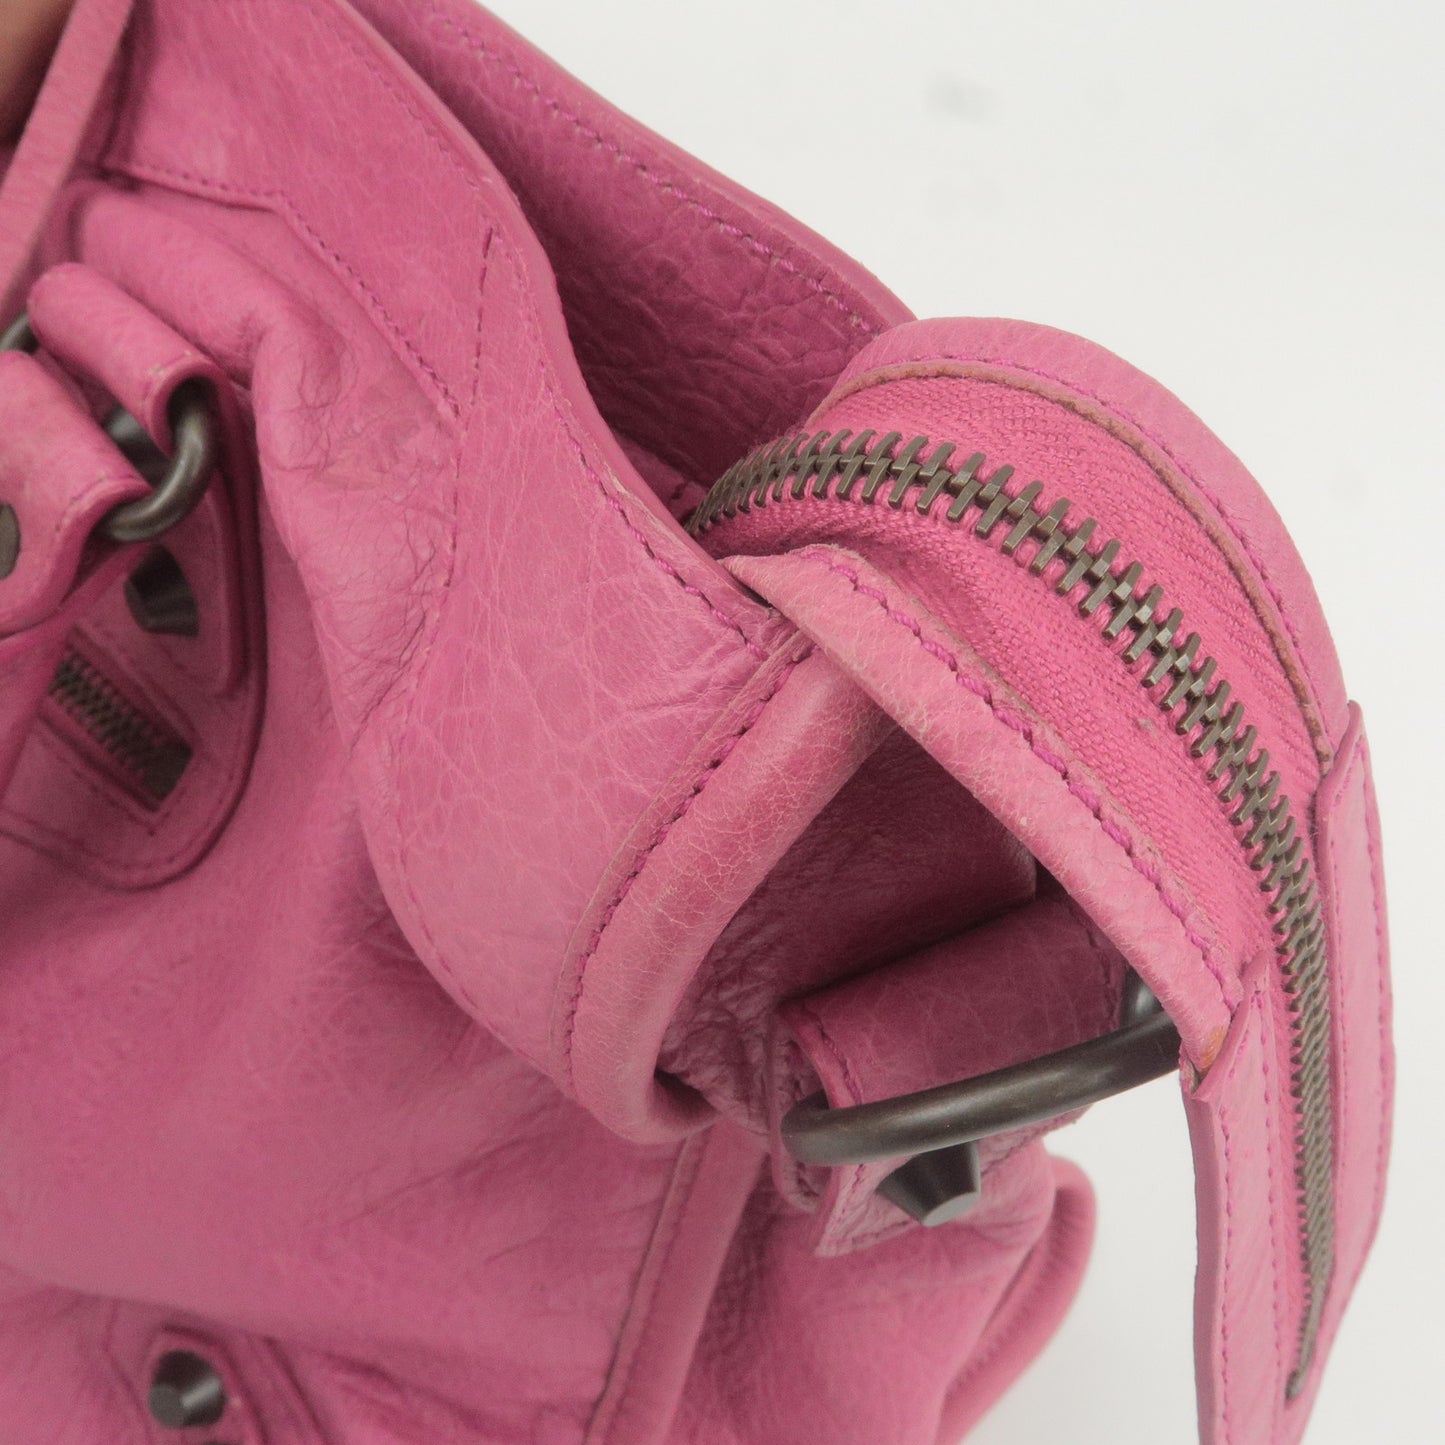 Bag - Pink - Hand - 115748 – dct - 2Way - New Graffiti Shoulder Bag -  BALENCIAGA - Giant - Leather - ep_vintage luxury Store - City